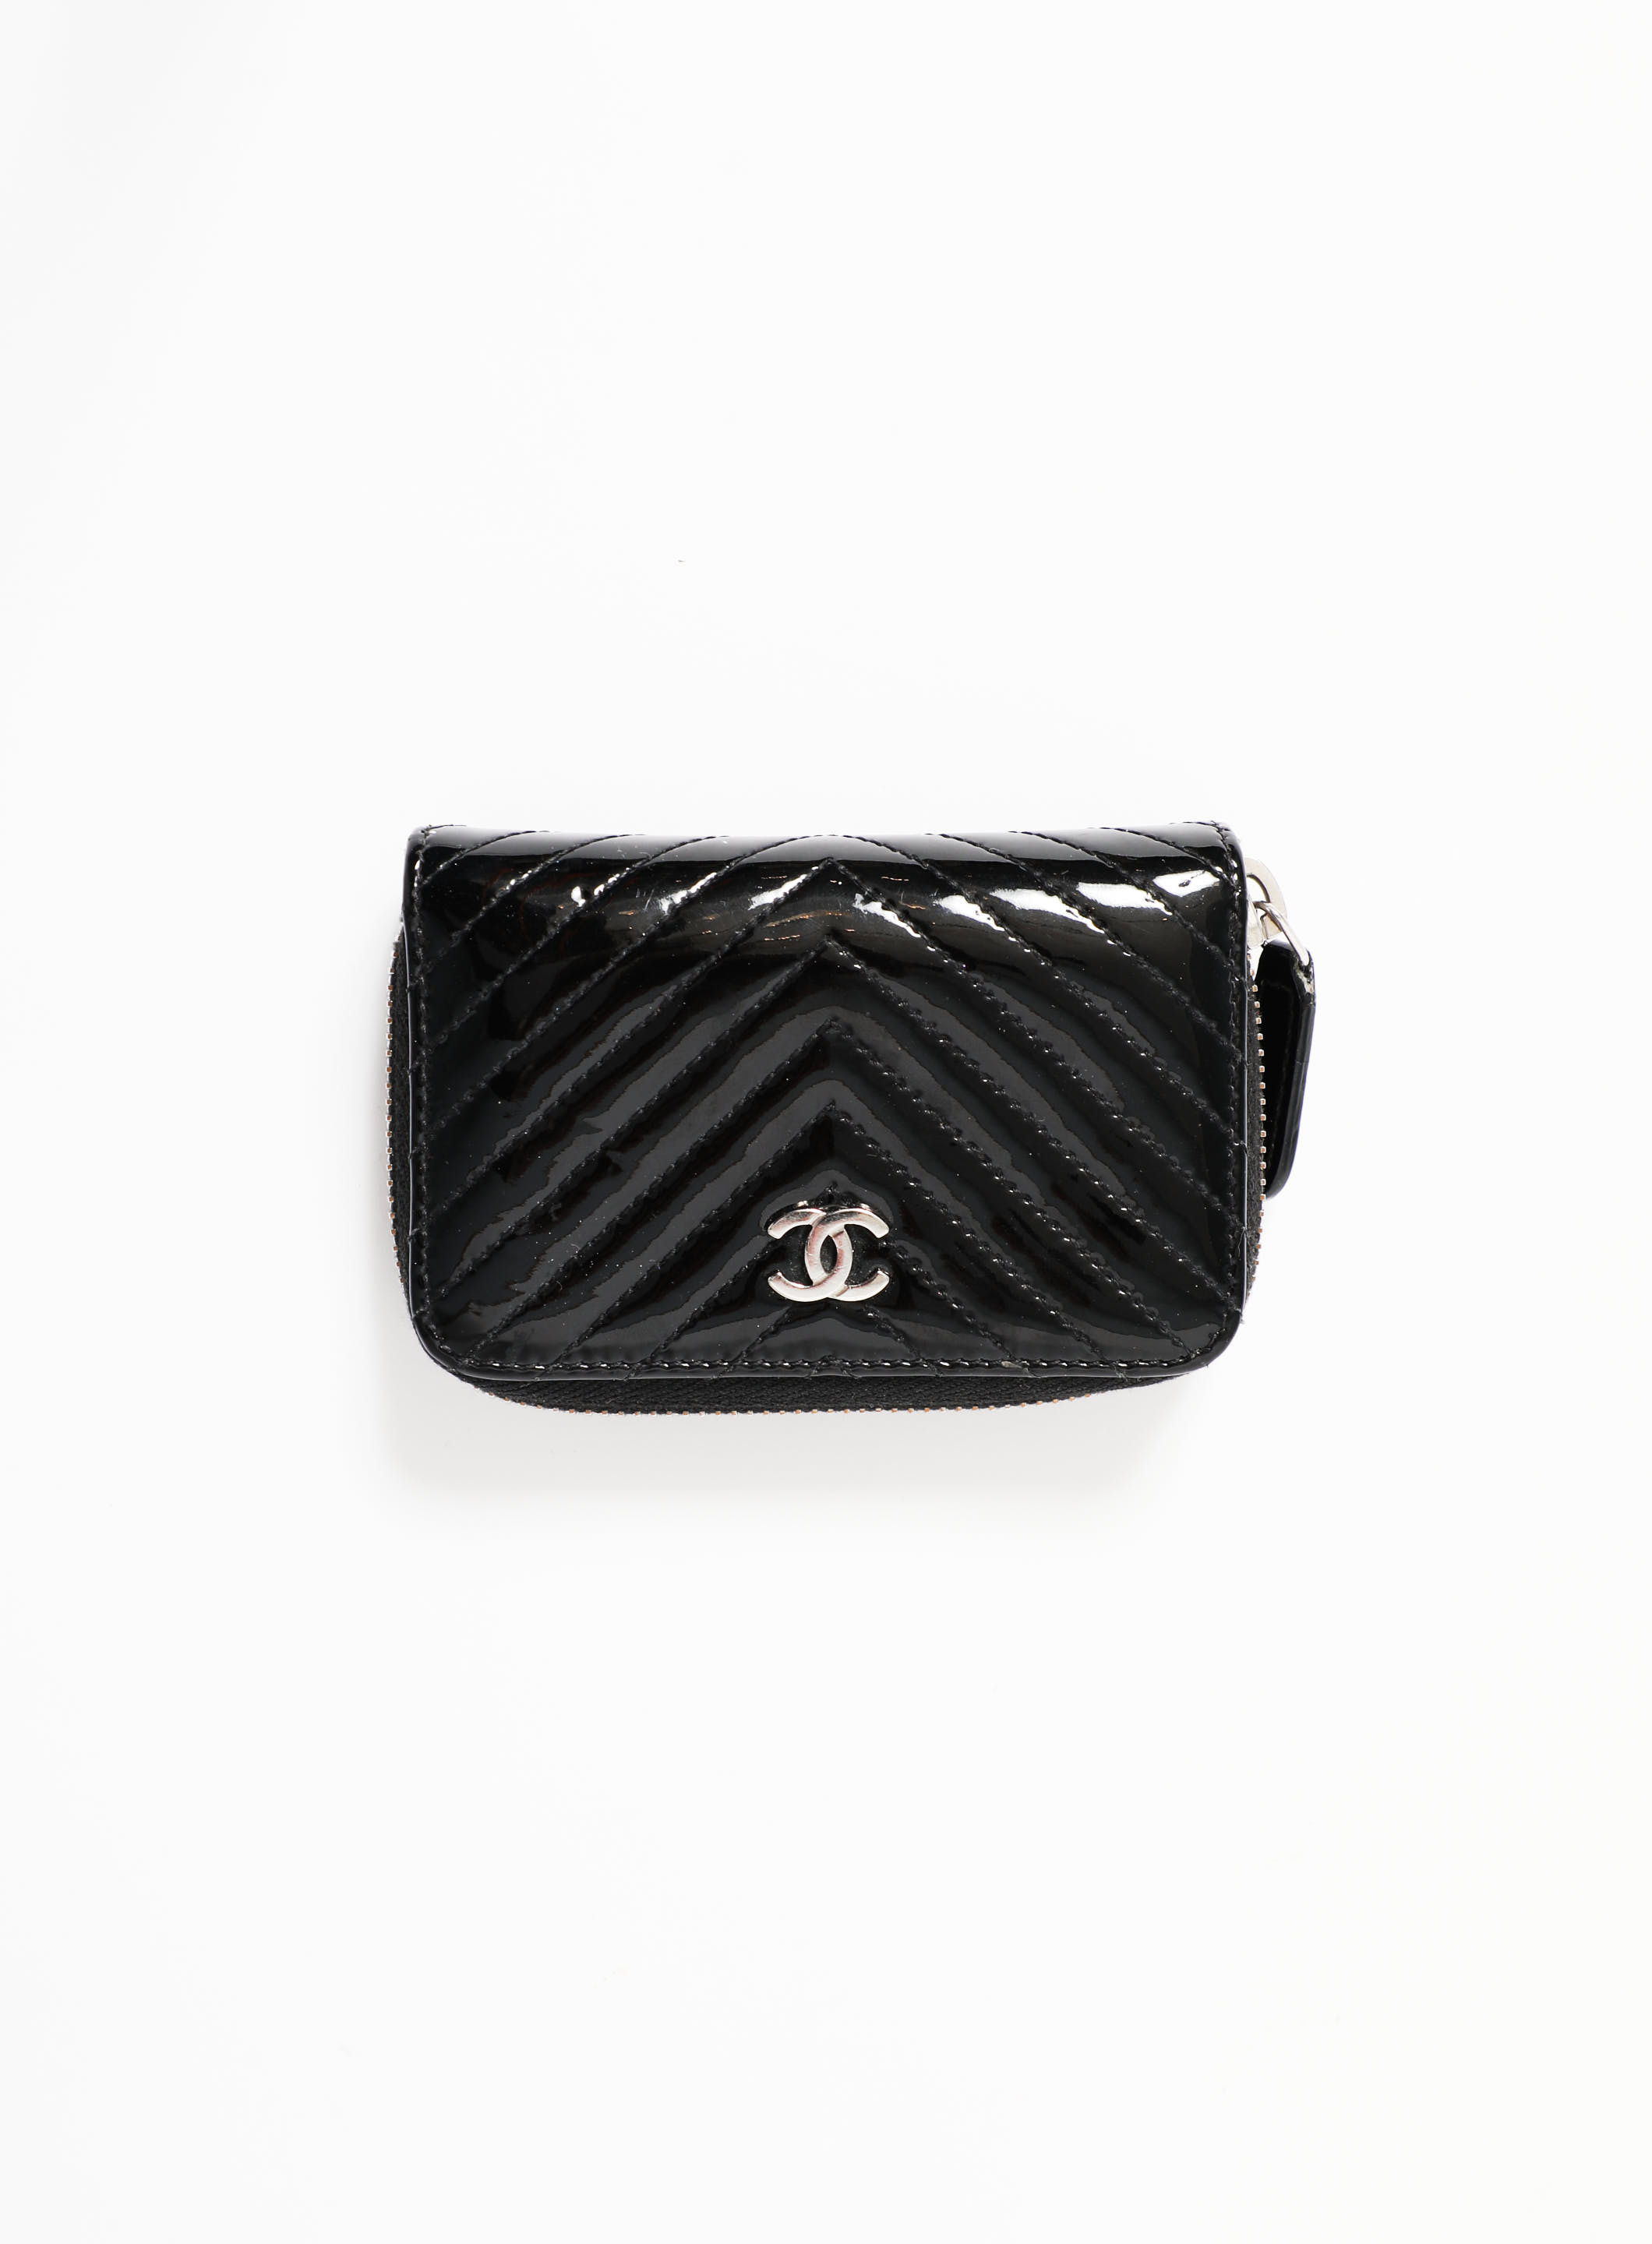 CHANEL #35405 Black Patent Leather Mademoiselle Camera Bag